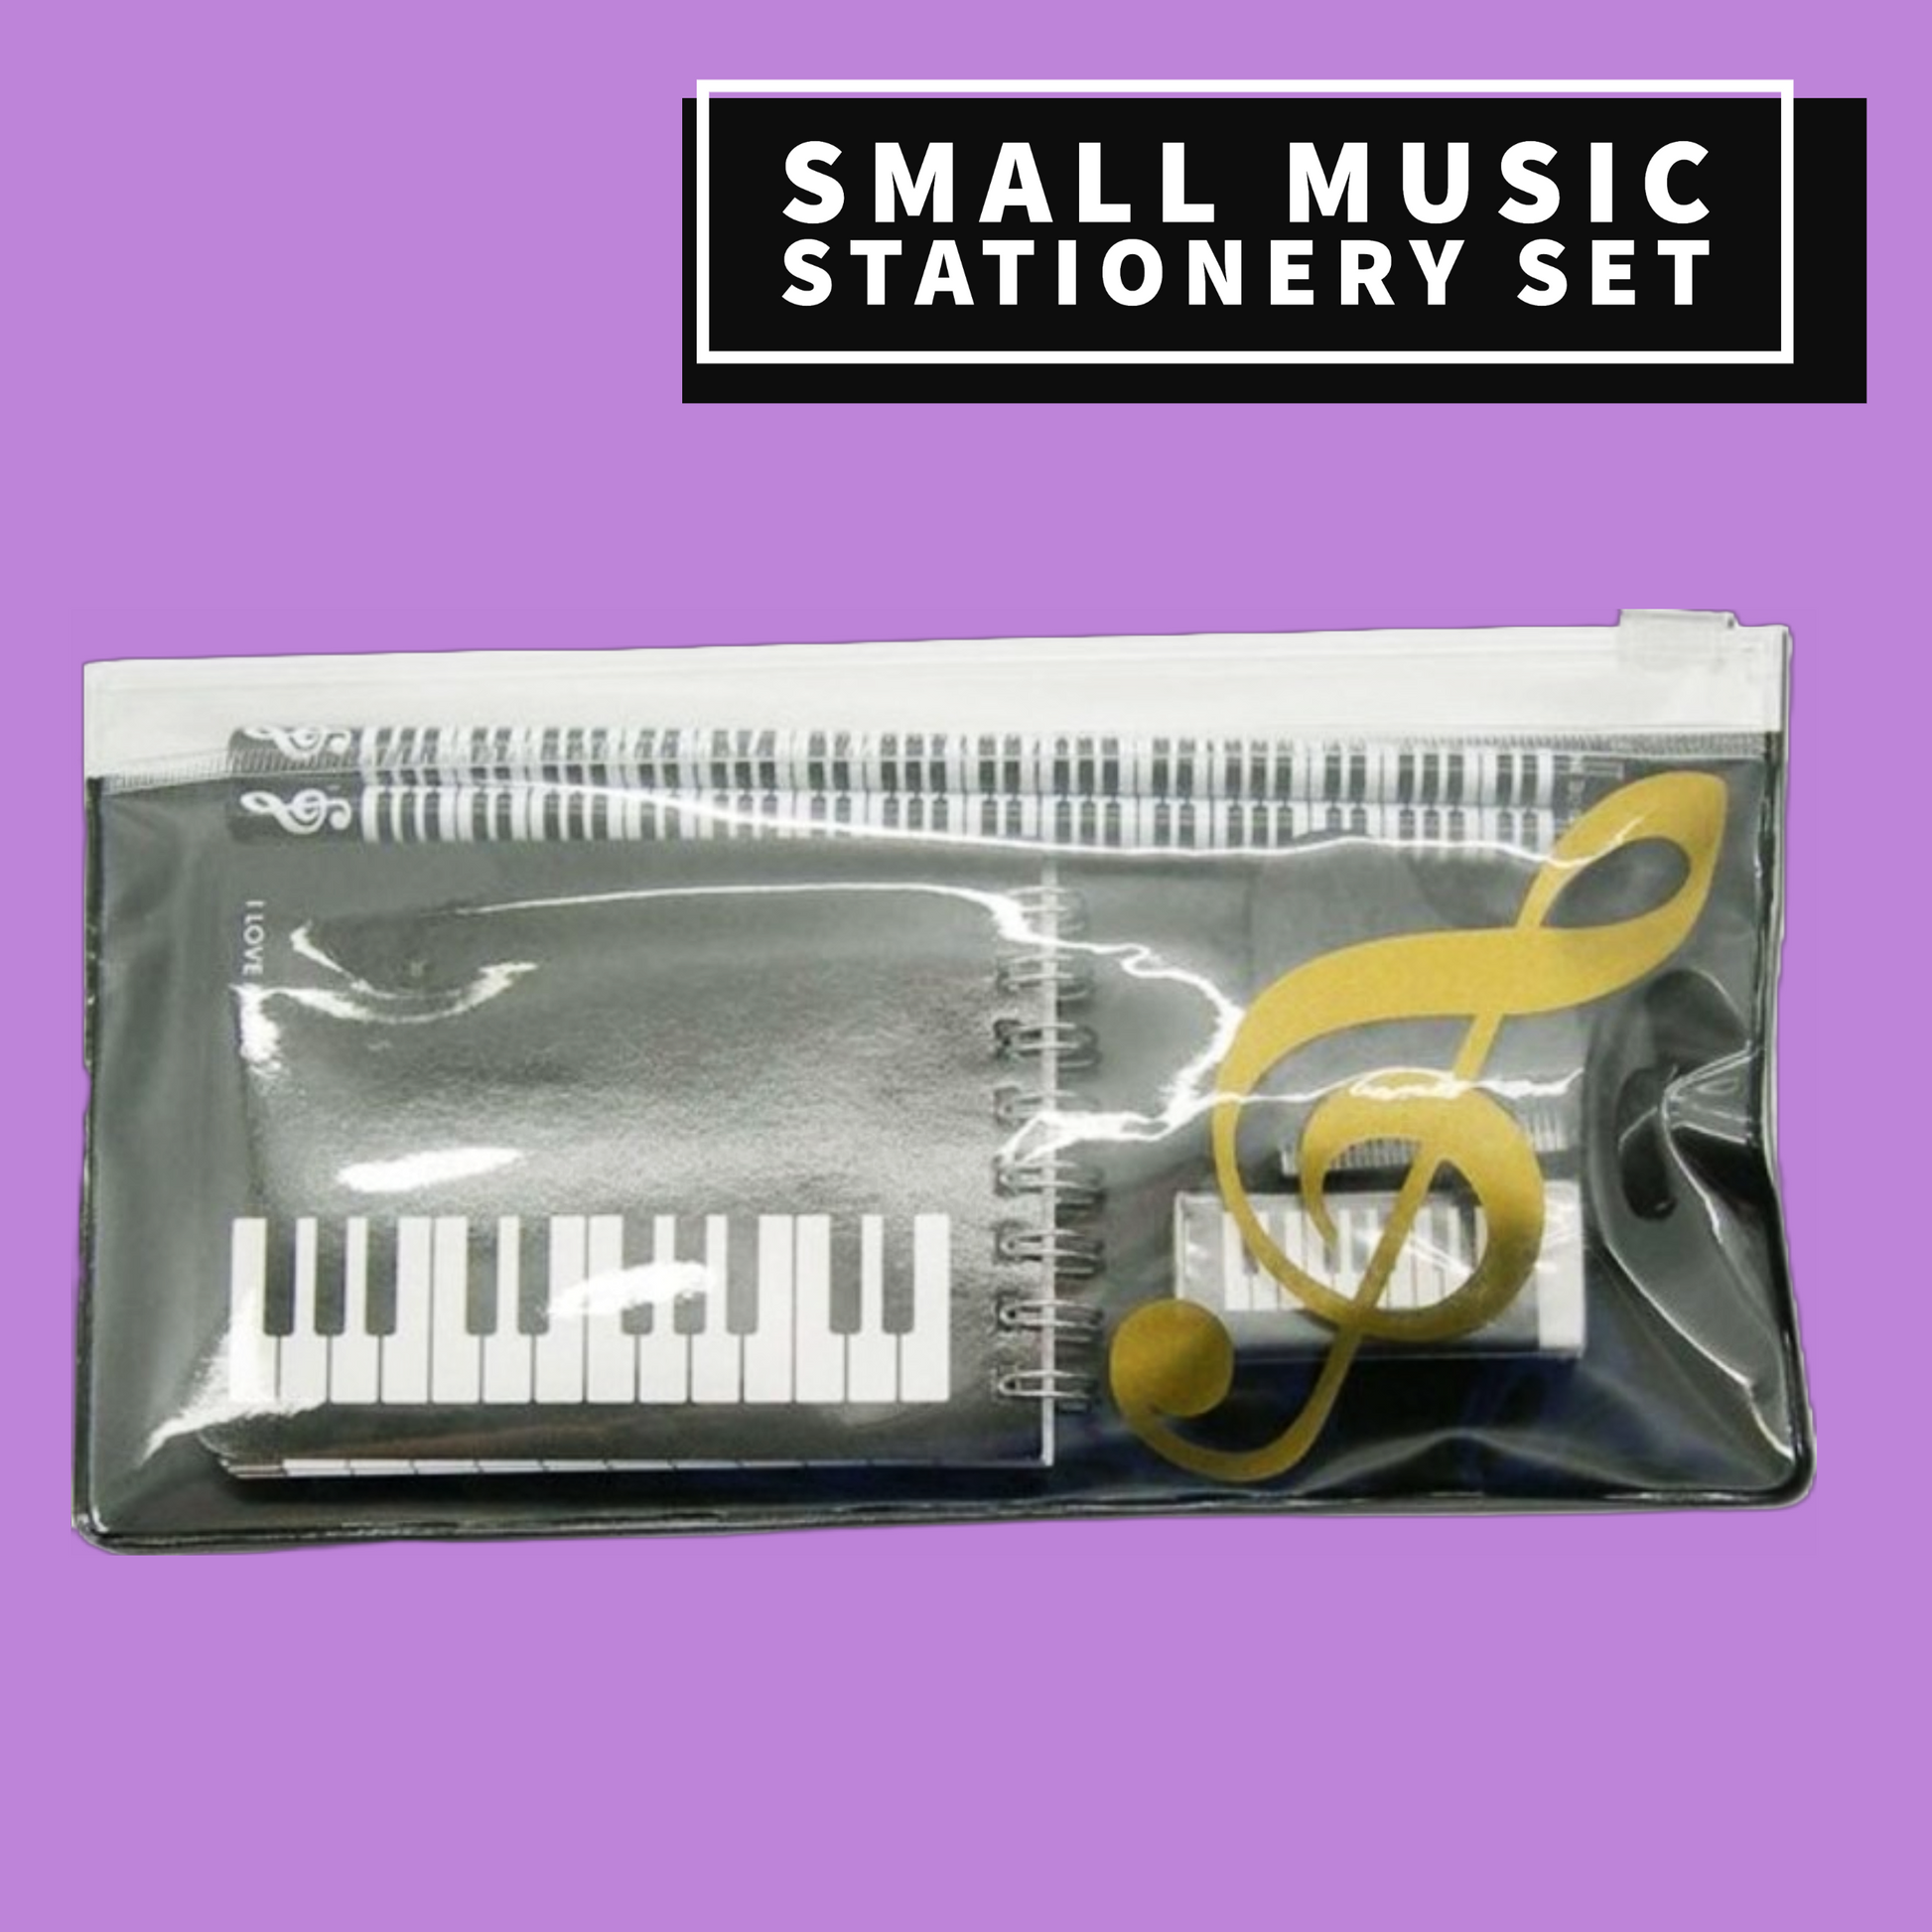 Small Musical Stationery Set Giftware